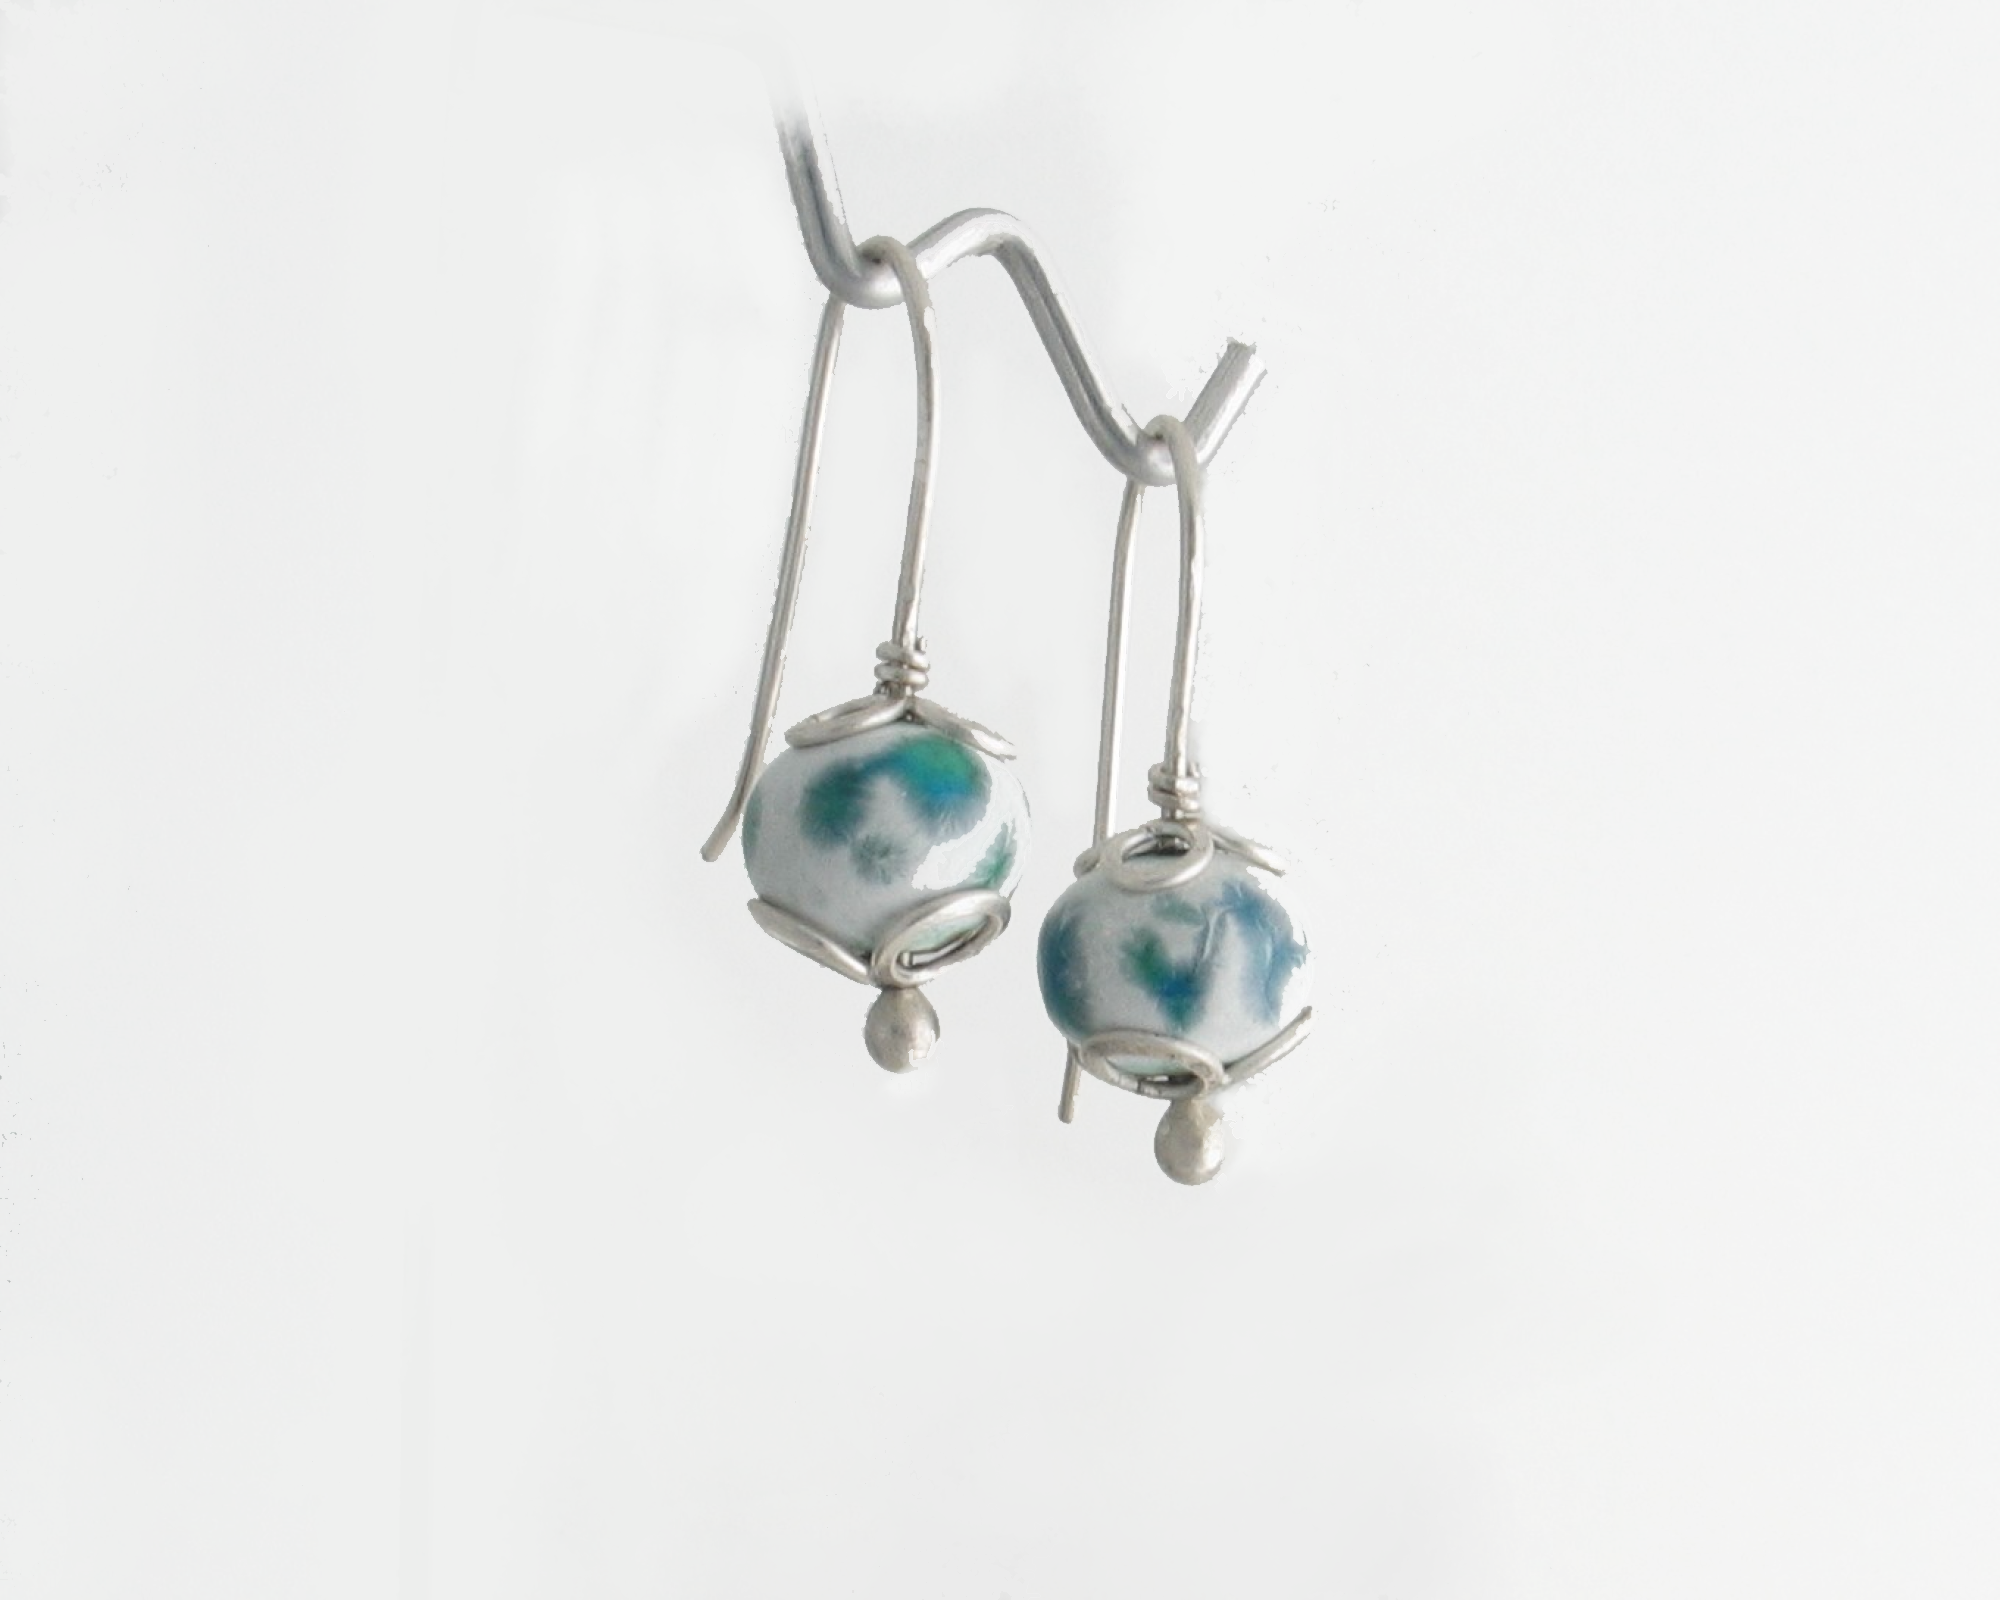 Copper Enamel Spheres of White Turquoise and Water Blue Dangle Earrings with Argentium 935 Sterling Silver Earwires